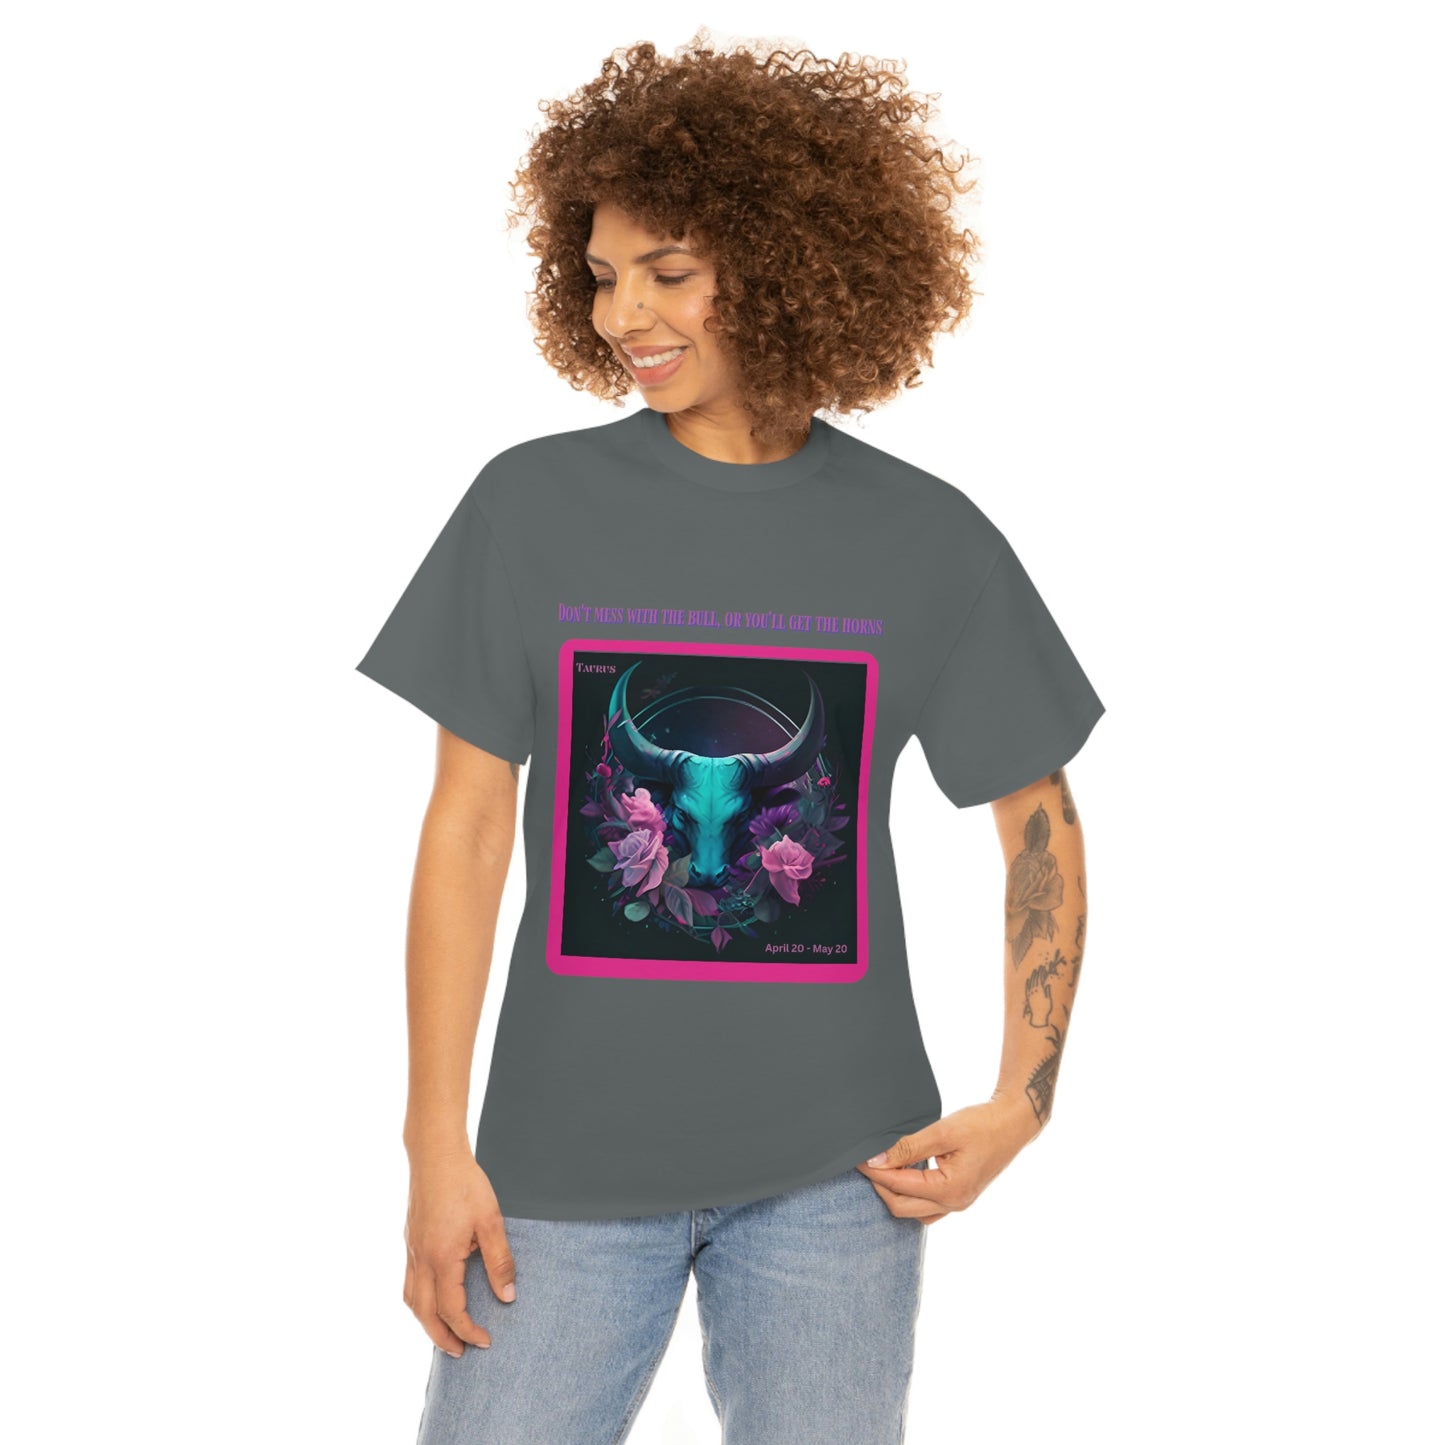 Don't Mess With The Bull Taurus T-shirt